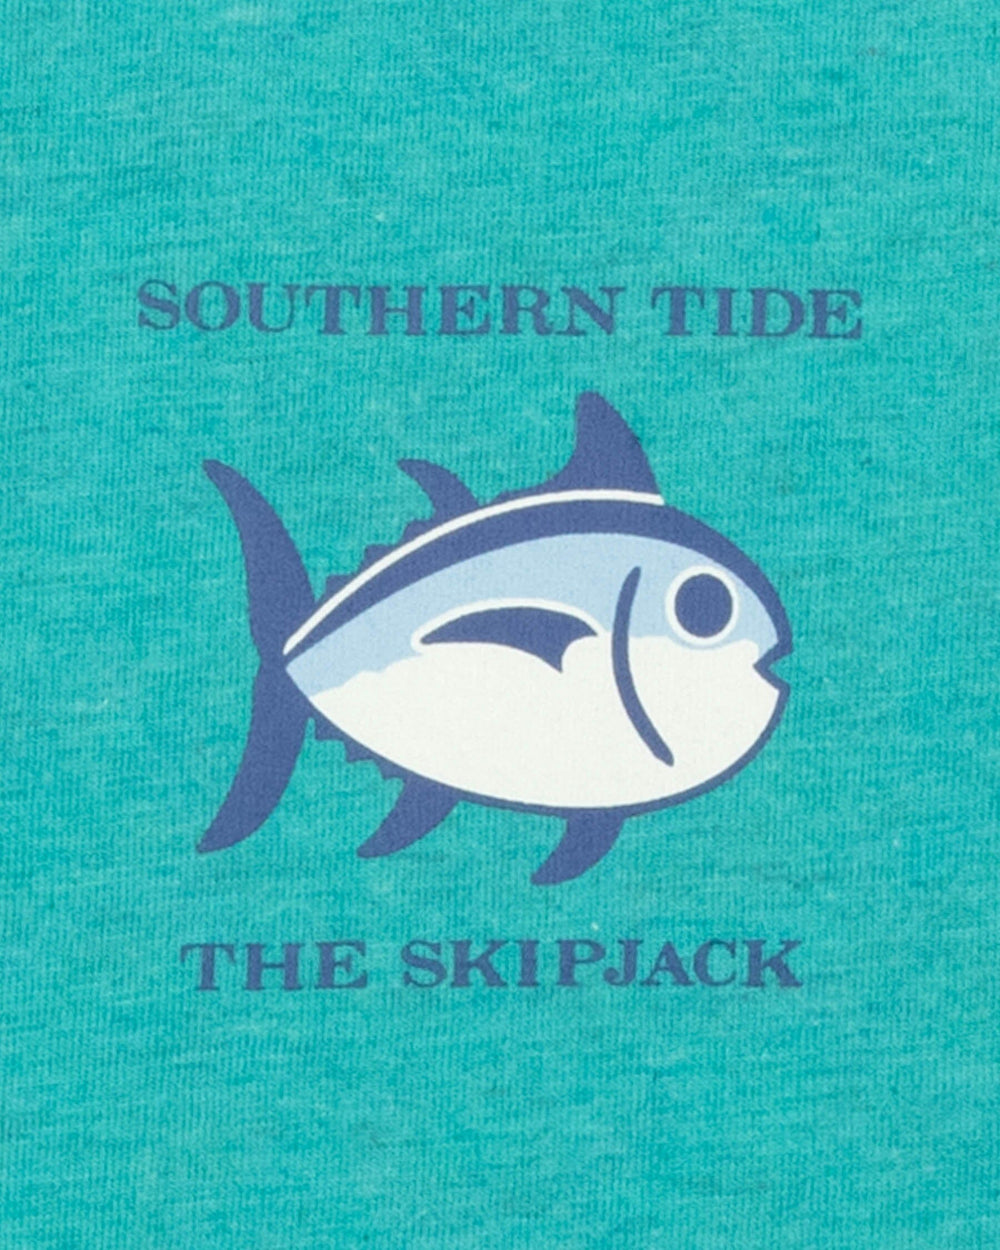 The detail view of the Southern Tide Heather Original Skipjack T-Shirt 2 by Southern Tide - Heather Teal Depths